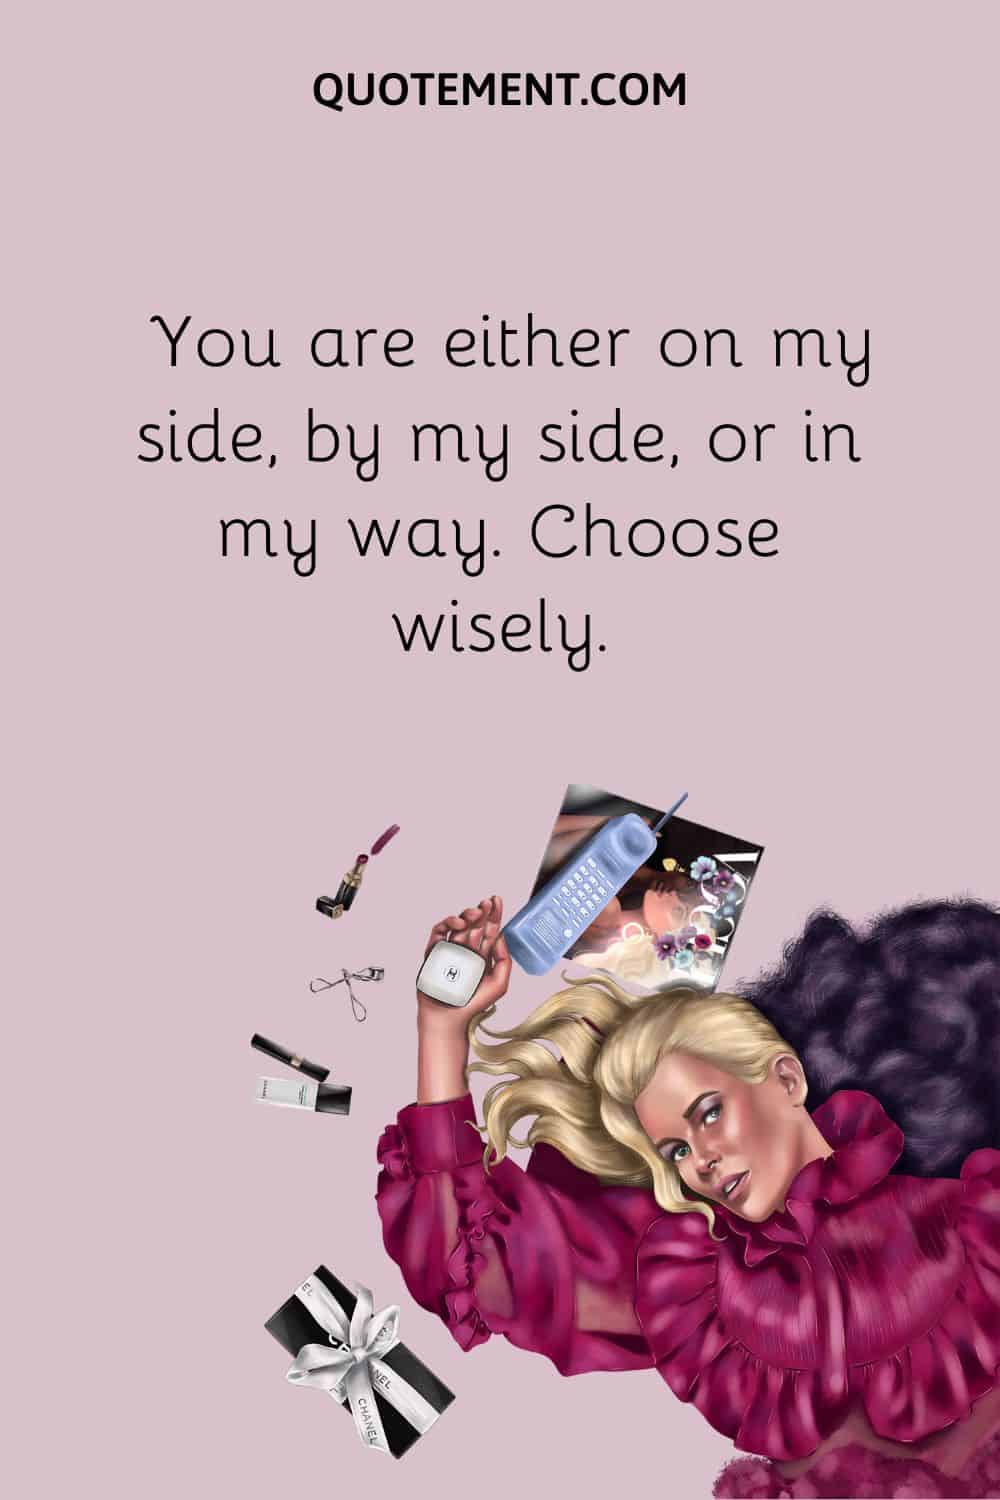 You are either on my side, by my side, or in my way